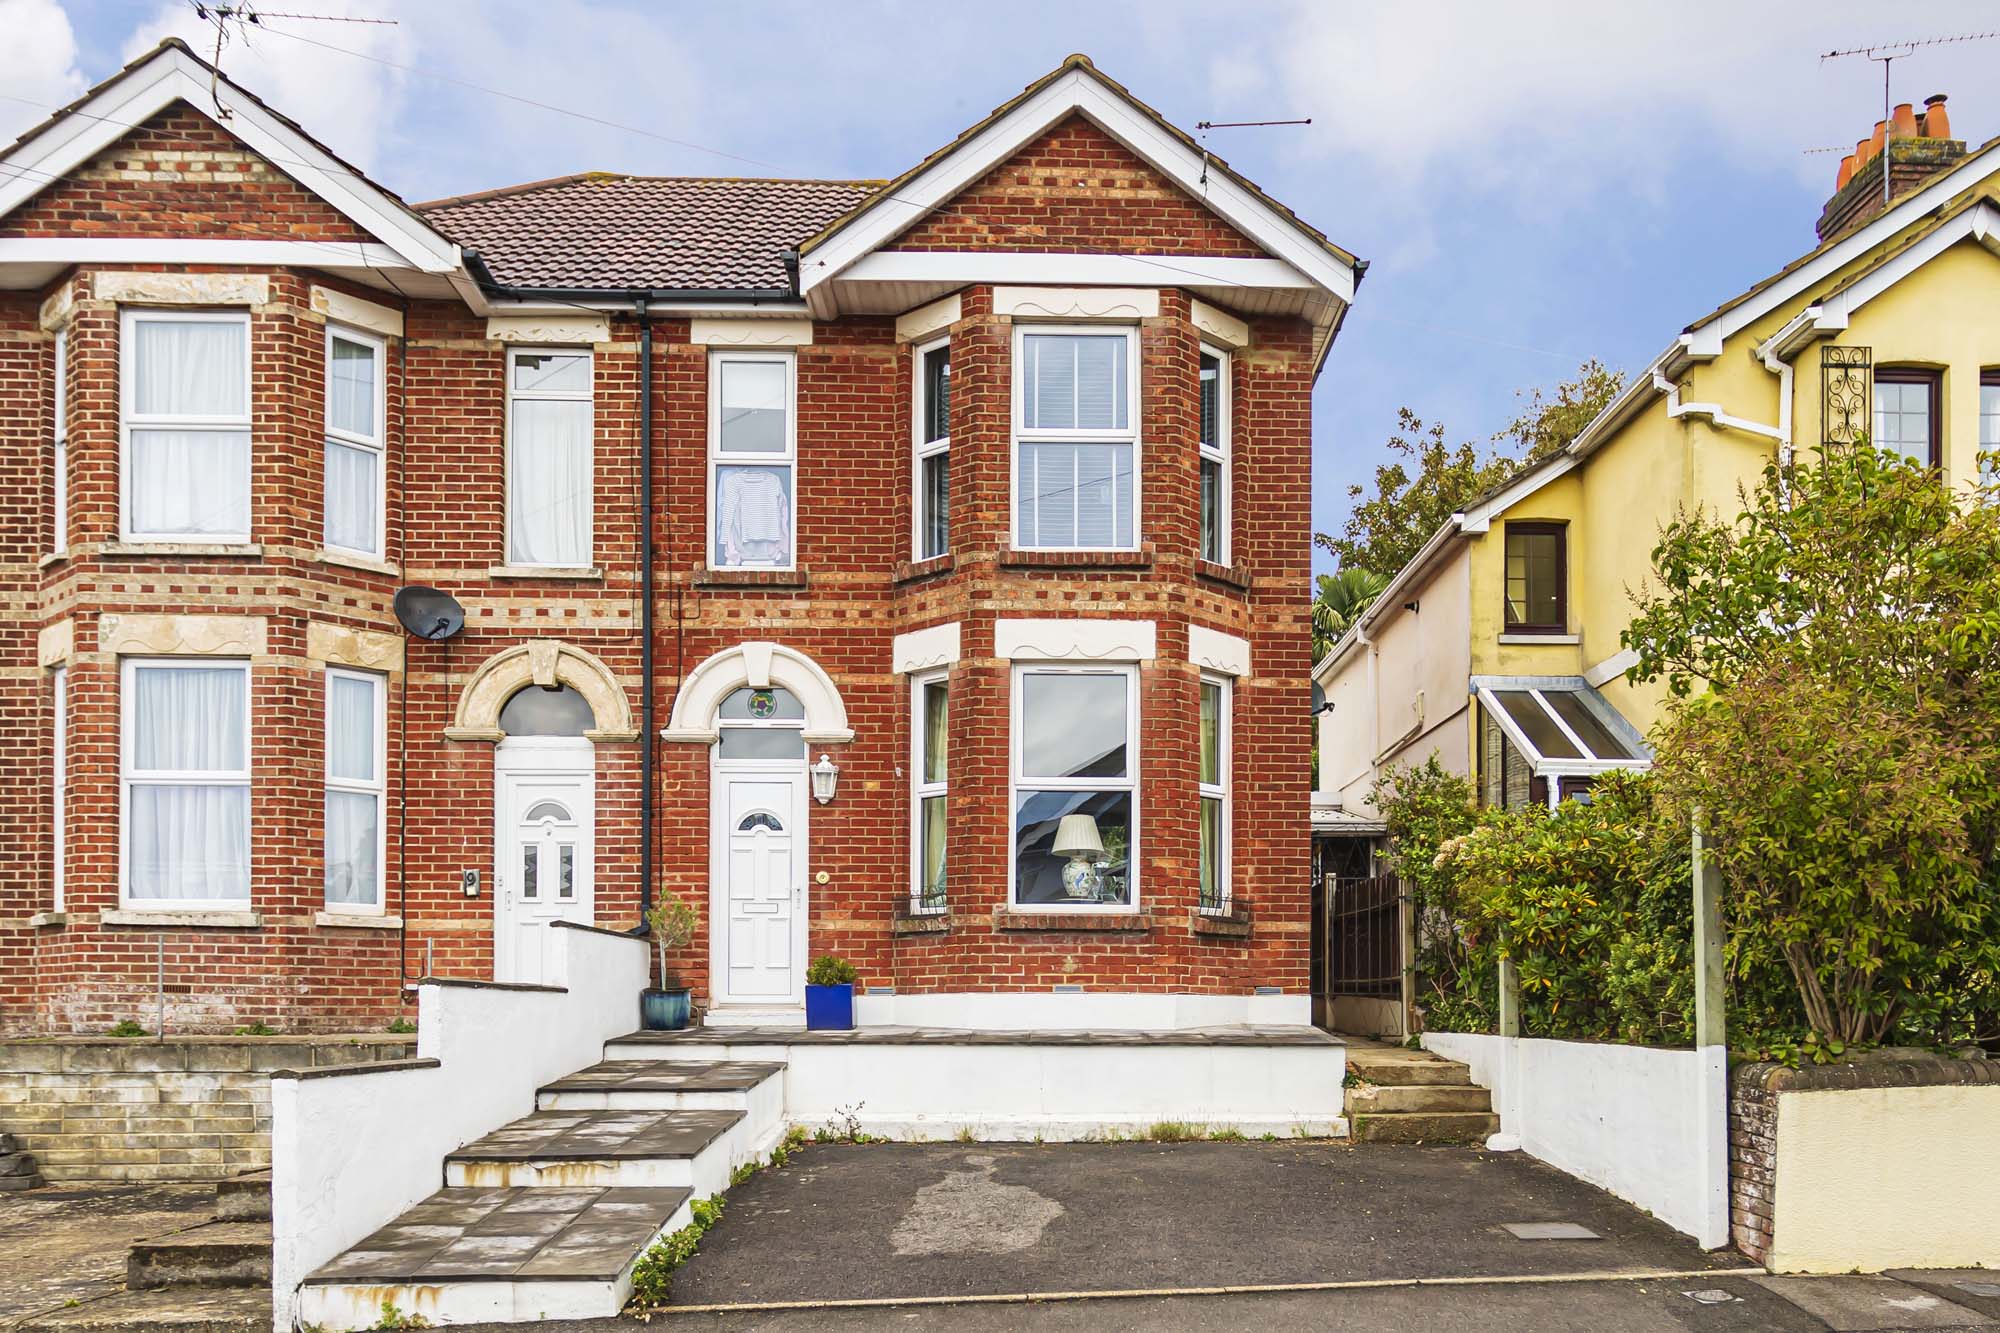 **LAUNCHING SATURDAY 5TH FEBRUARY-BY APPOINTMENT ONLY** You will fall in love the moment you walk into this fine example of a Victorian house. having being modernised over the years yet retaining much of its original character and charm. Situated in a popular location, just a short walk to local schools and amenities.